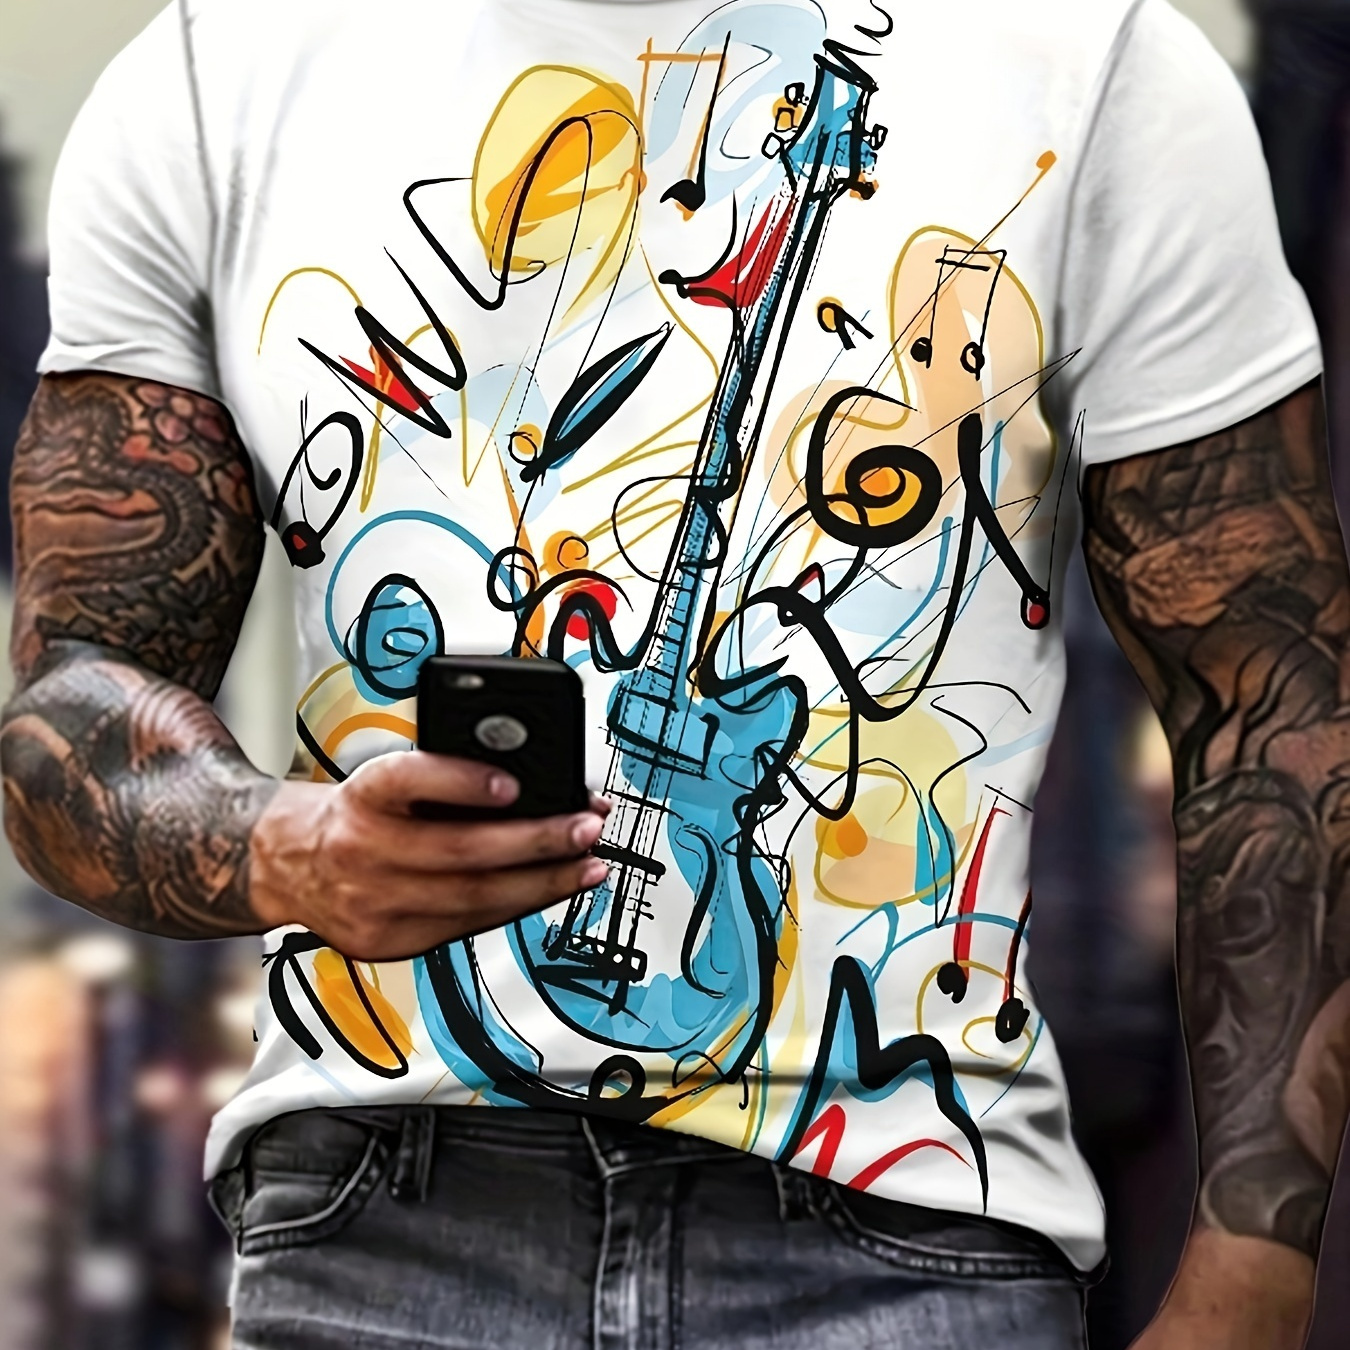 

Stylish Guitar Pattern Print Men's Comfy T-shirt, Graphic Tee Men's Summer Clothes, Men's Outfits